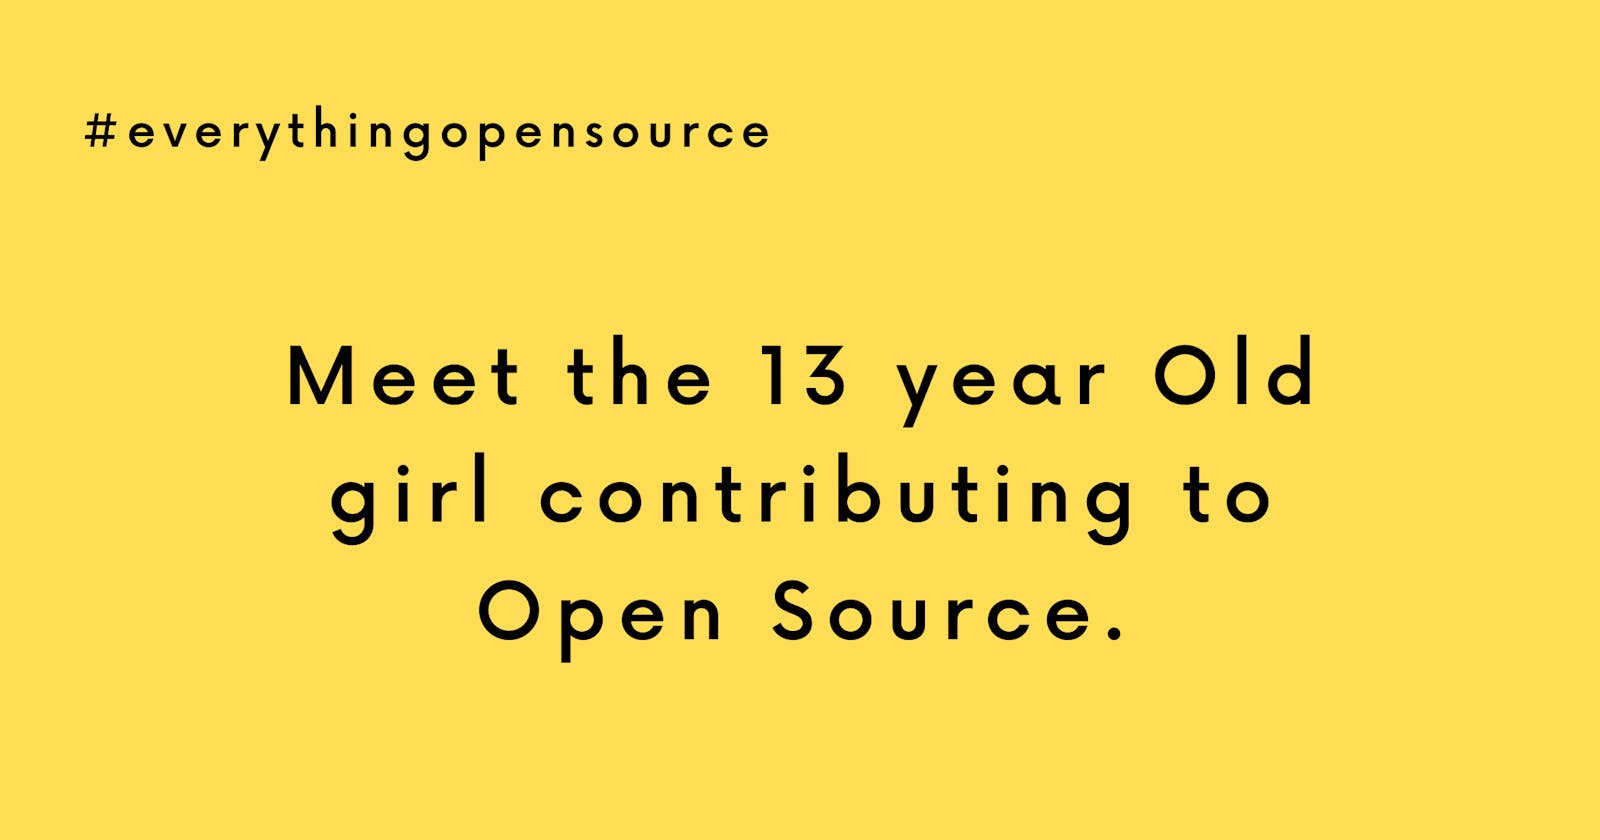 Meet the 13 year old girl contributing to Open Source